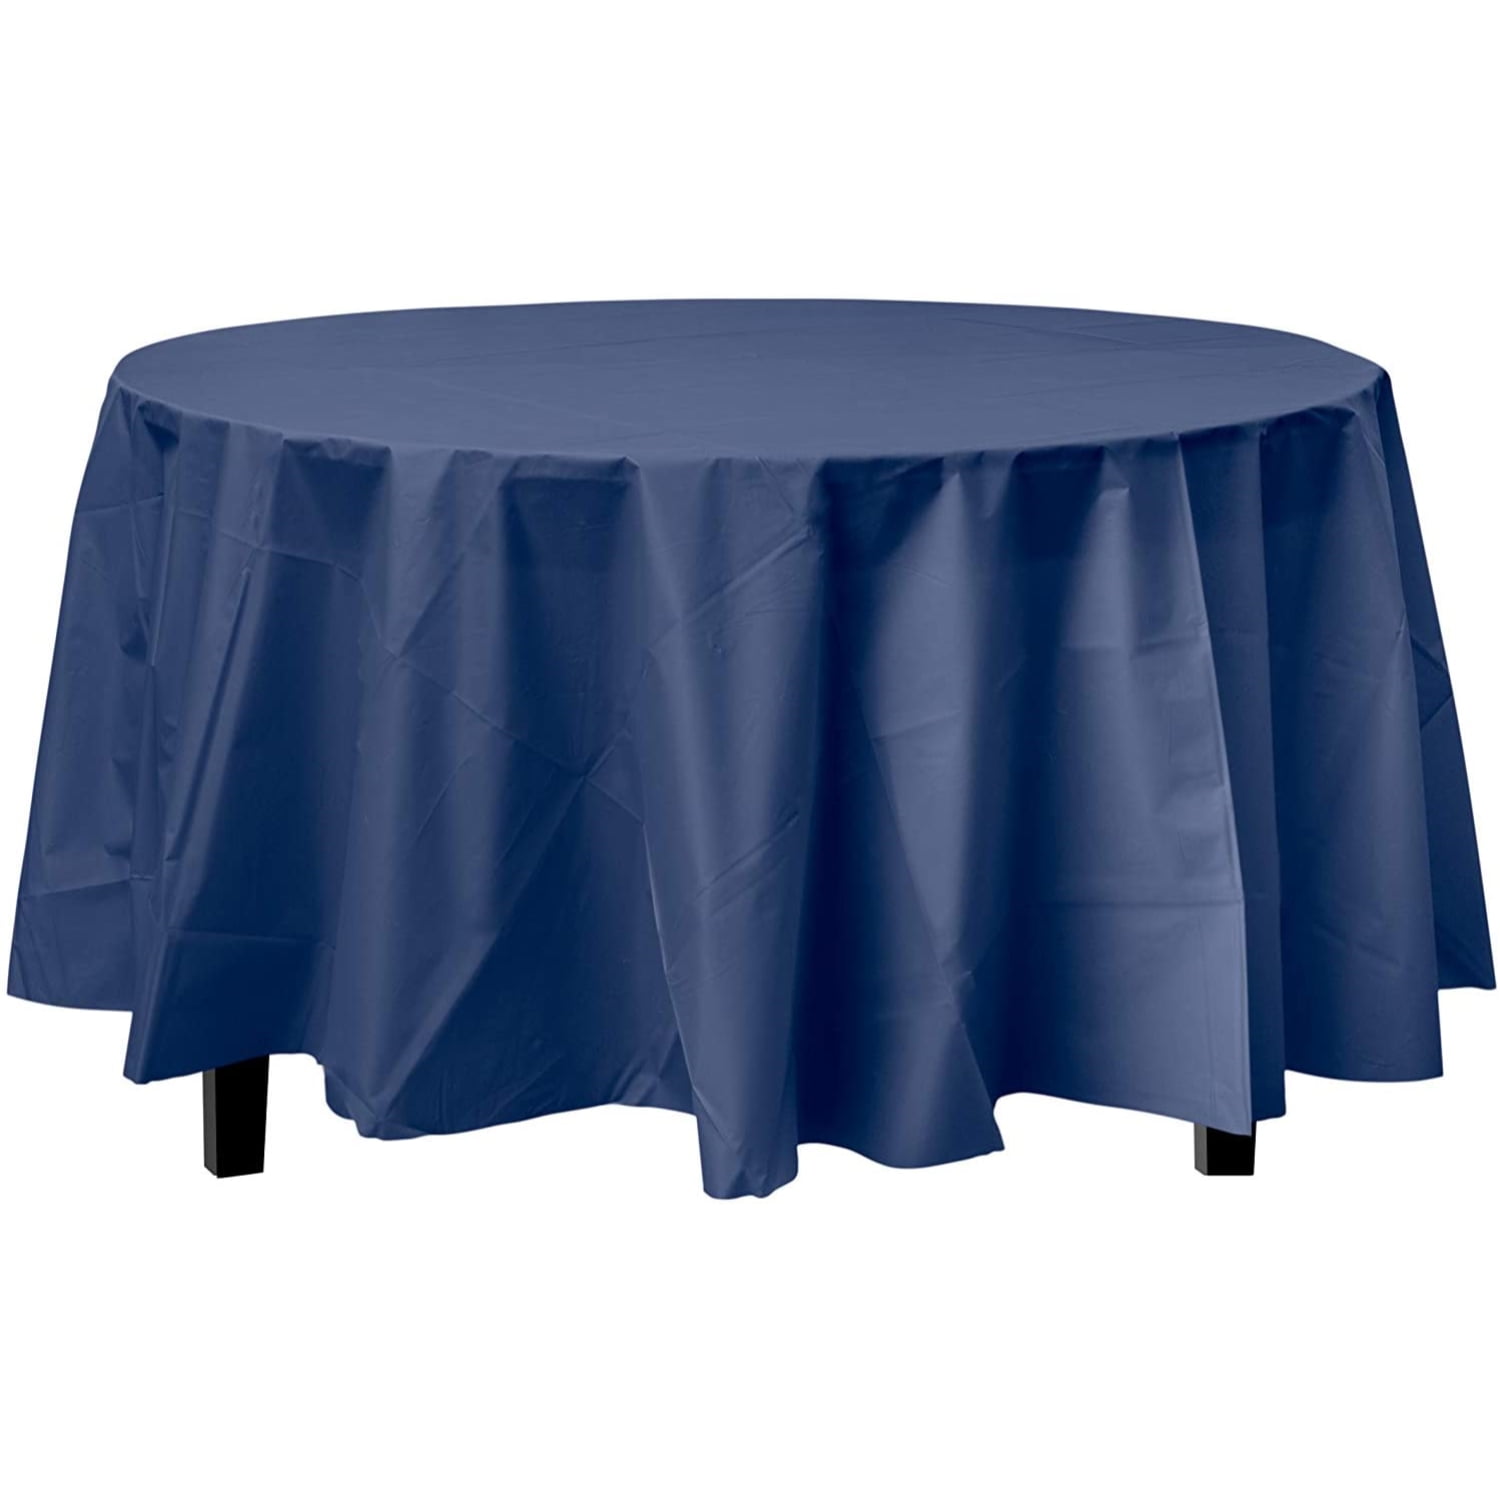 Bulk Premium Plastic Disposable 84 Inch, What Size Tablecloth For 44 Inch Round Table